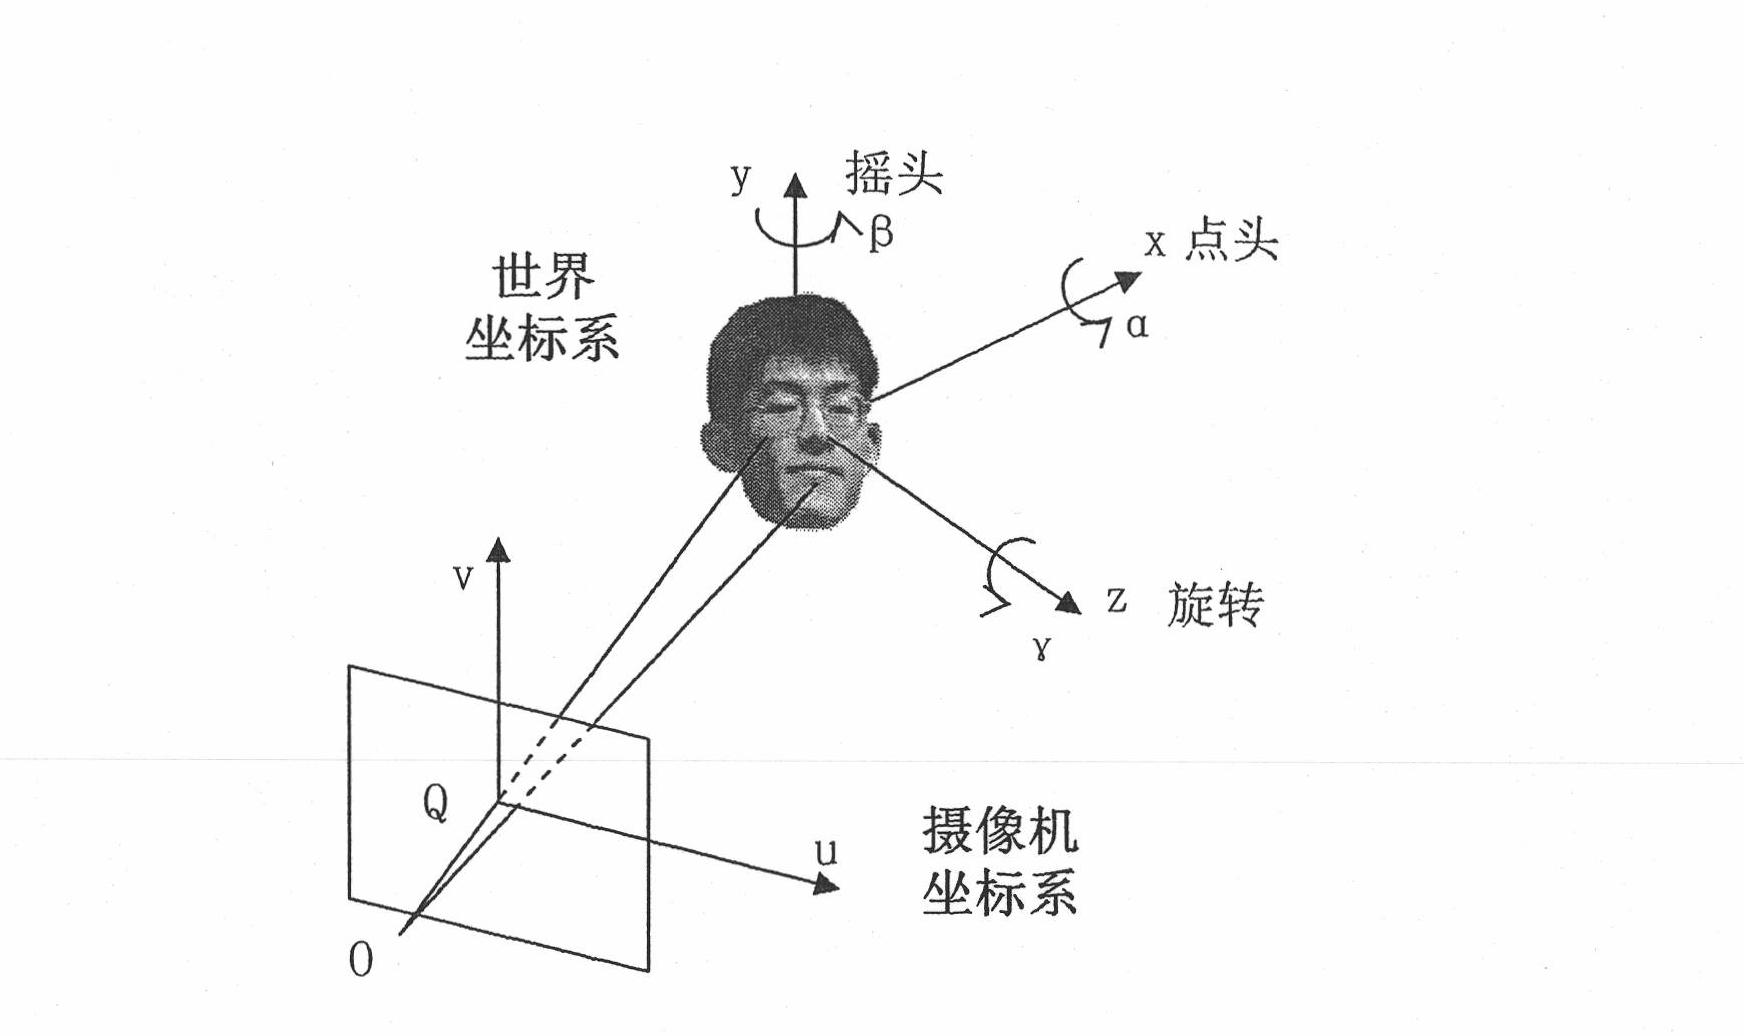 Method for analyzing facial expressions on basis of motion tracking